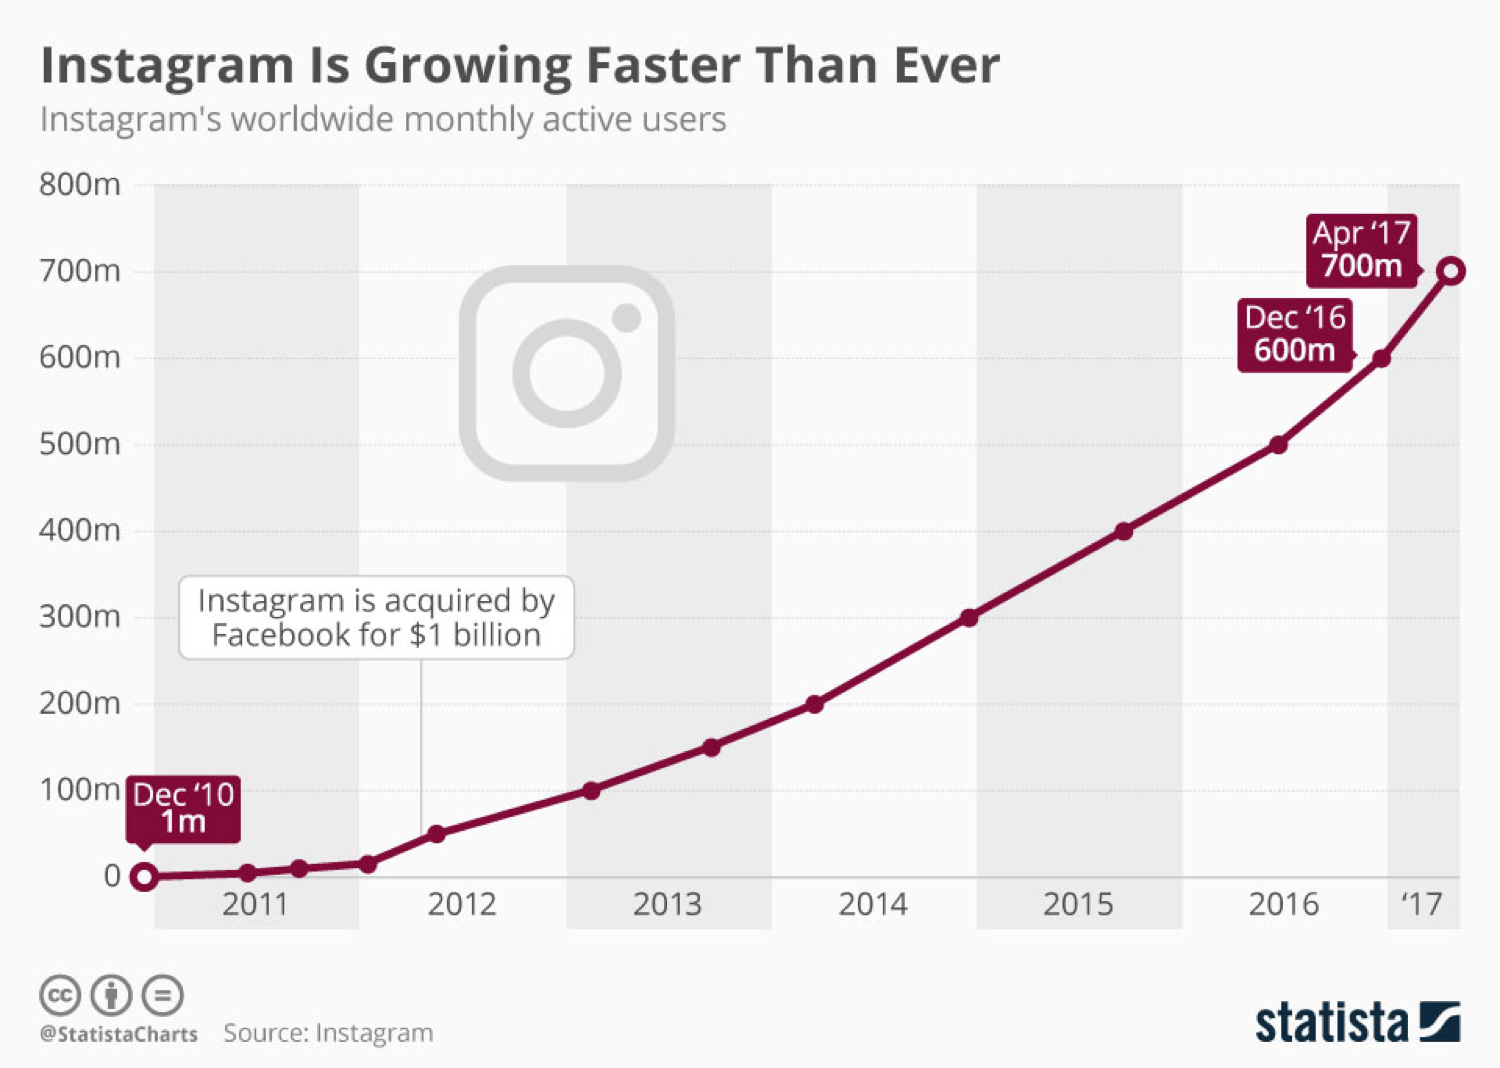 Instagram growth according to Statista